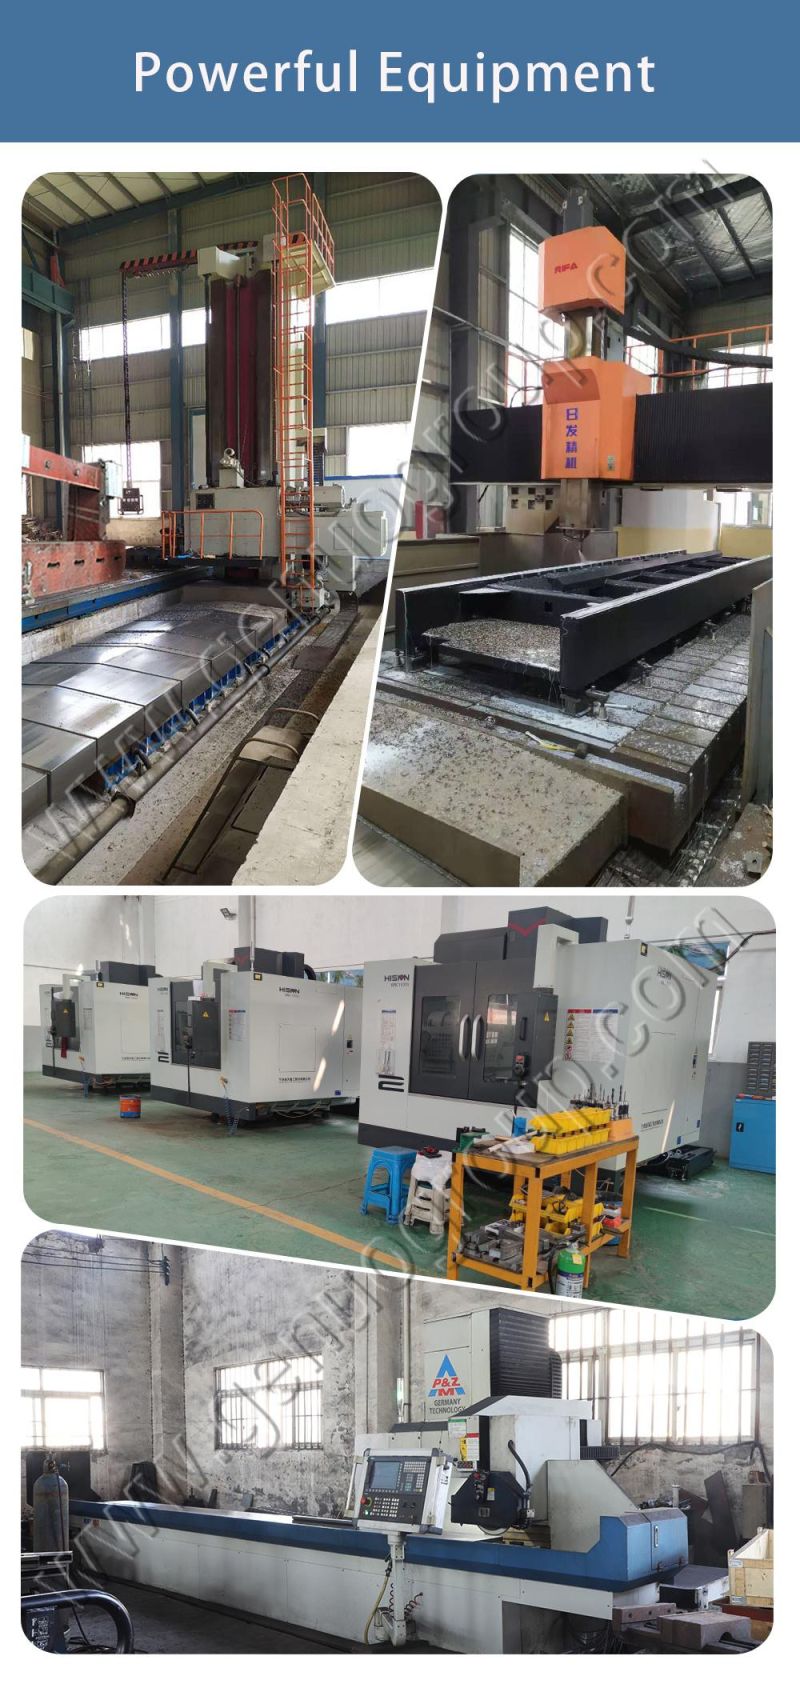 Automatic Fiber Laser Cutting Machine with Protective Cover